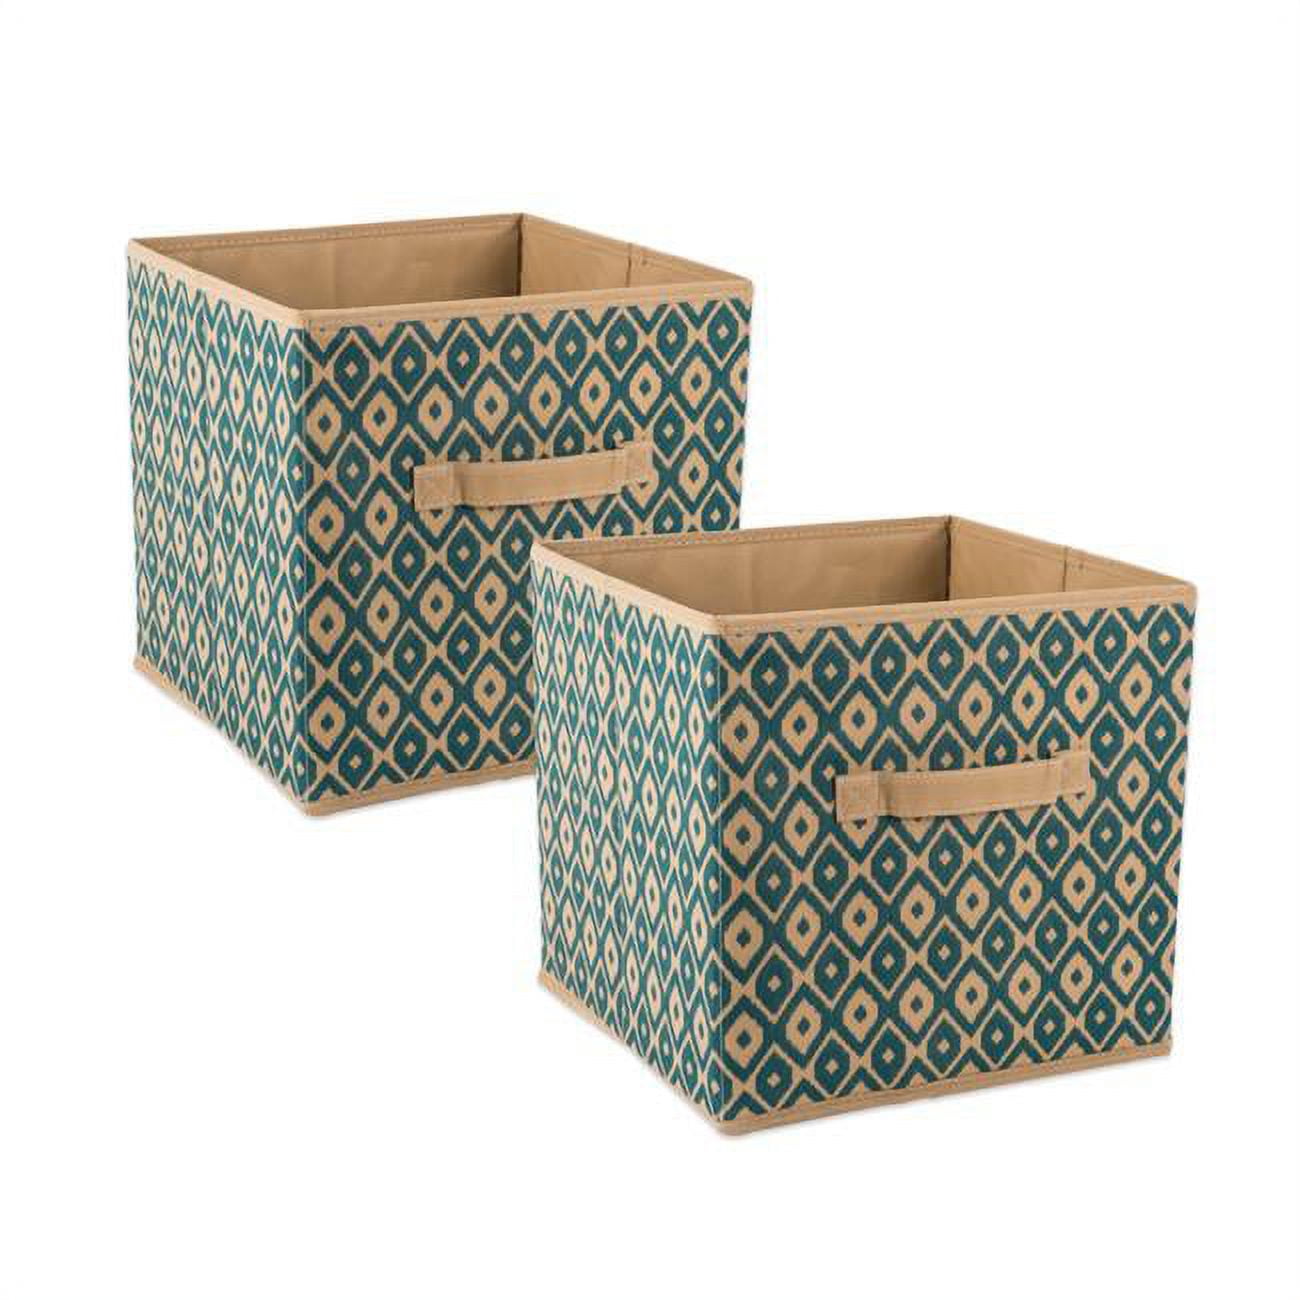 Design Imports Camz36995 11 X 11 X 11 In. Nonwoven Ikat Square Polyester Storage Cube, Teal - Set Of 2